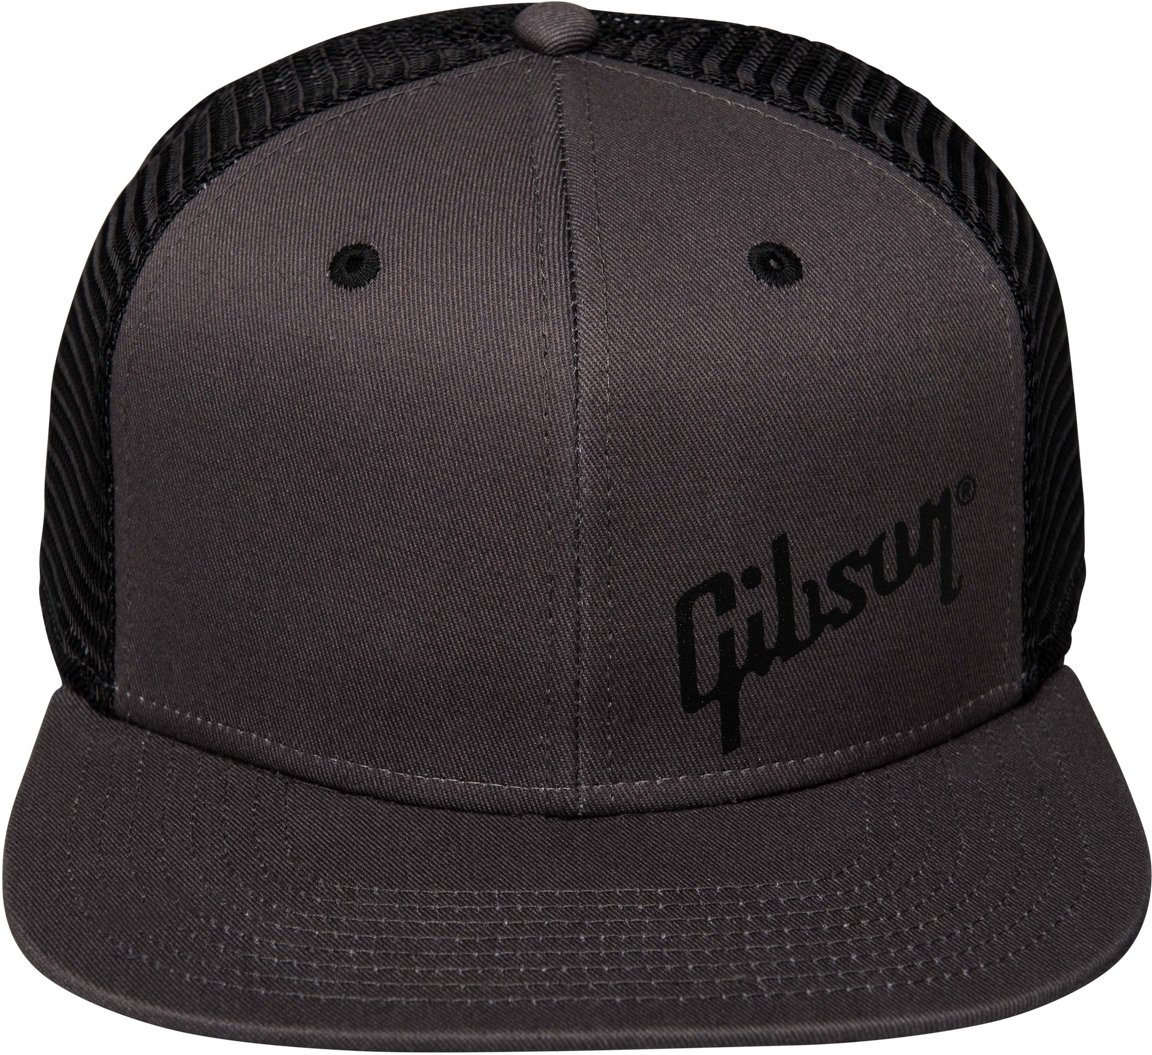 Gibson Charcoal Trucker Snapback - Taille Unique - Casquette - Main picture